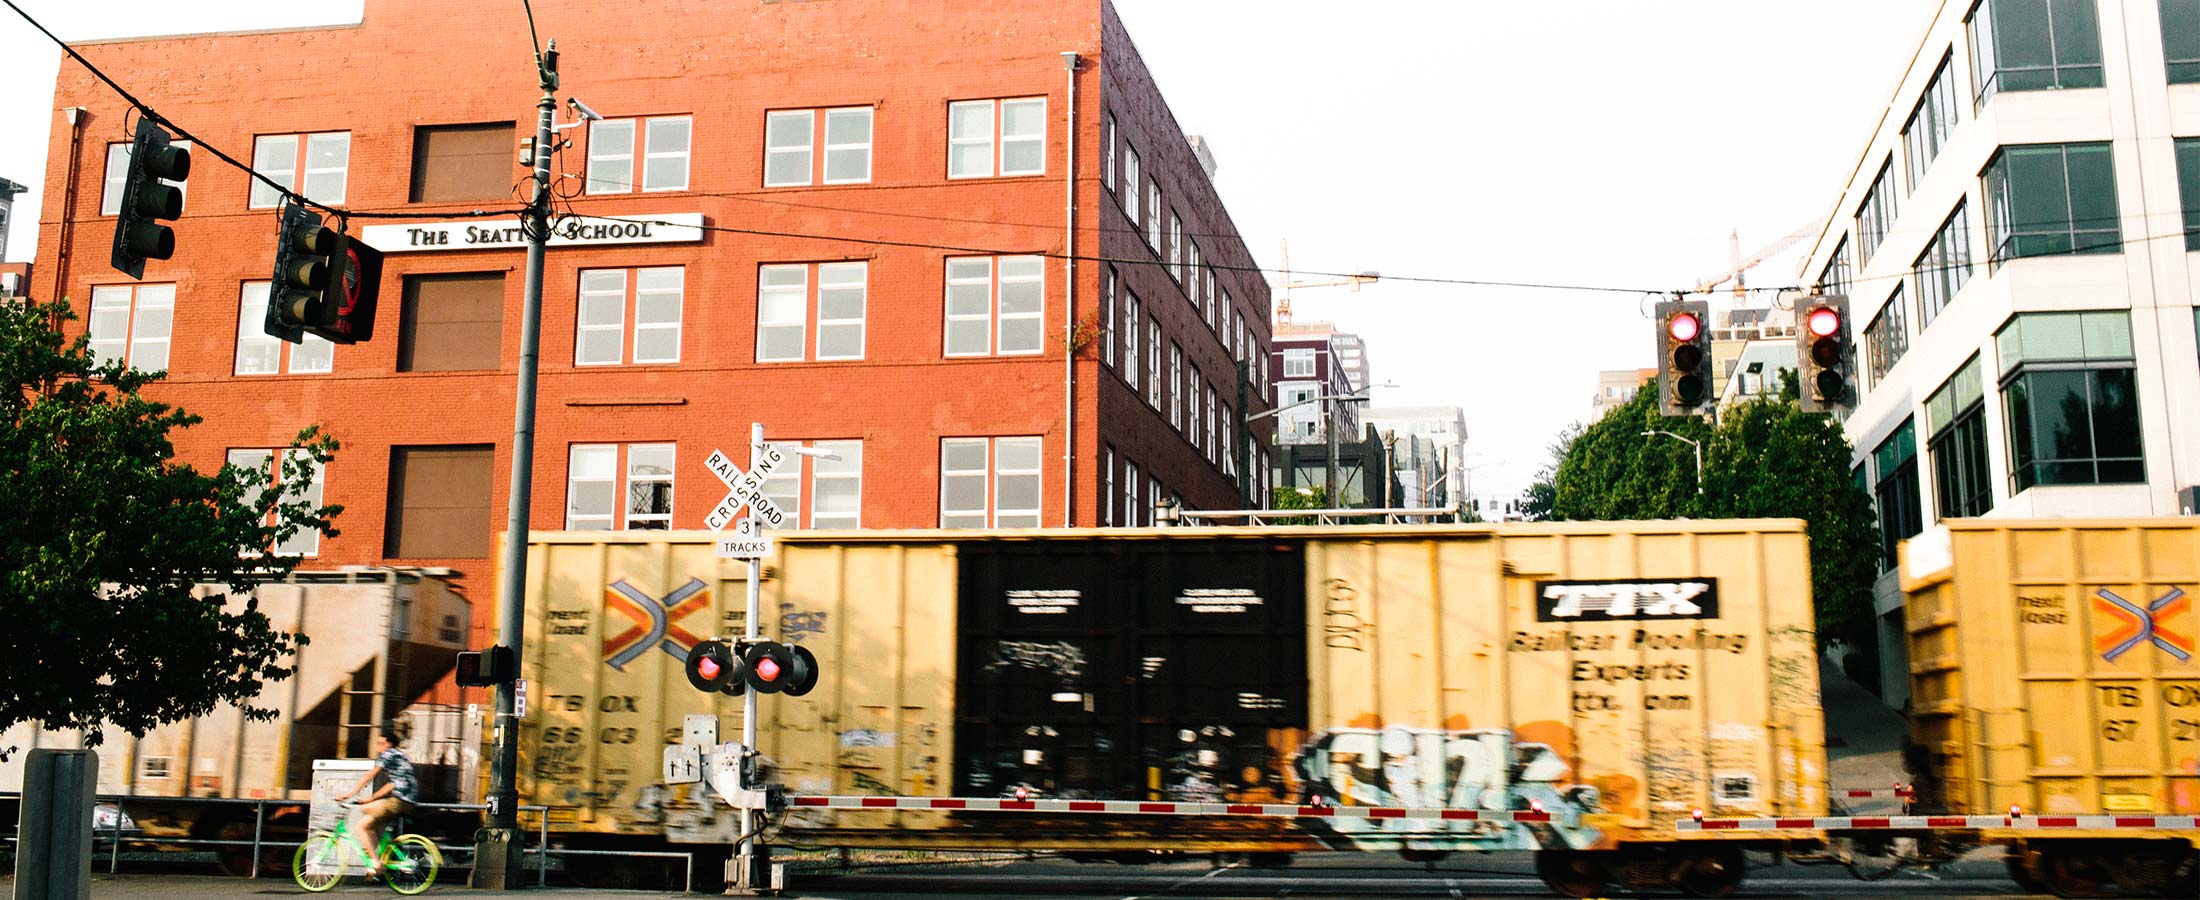 train in front of The Seattle School